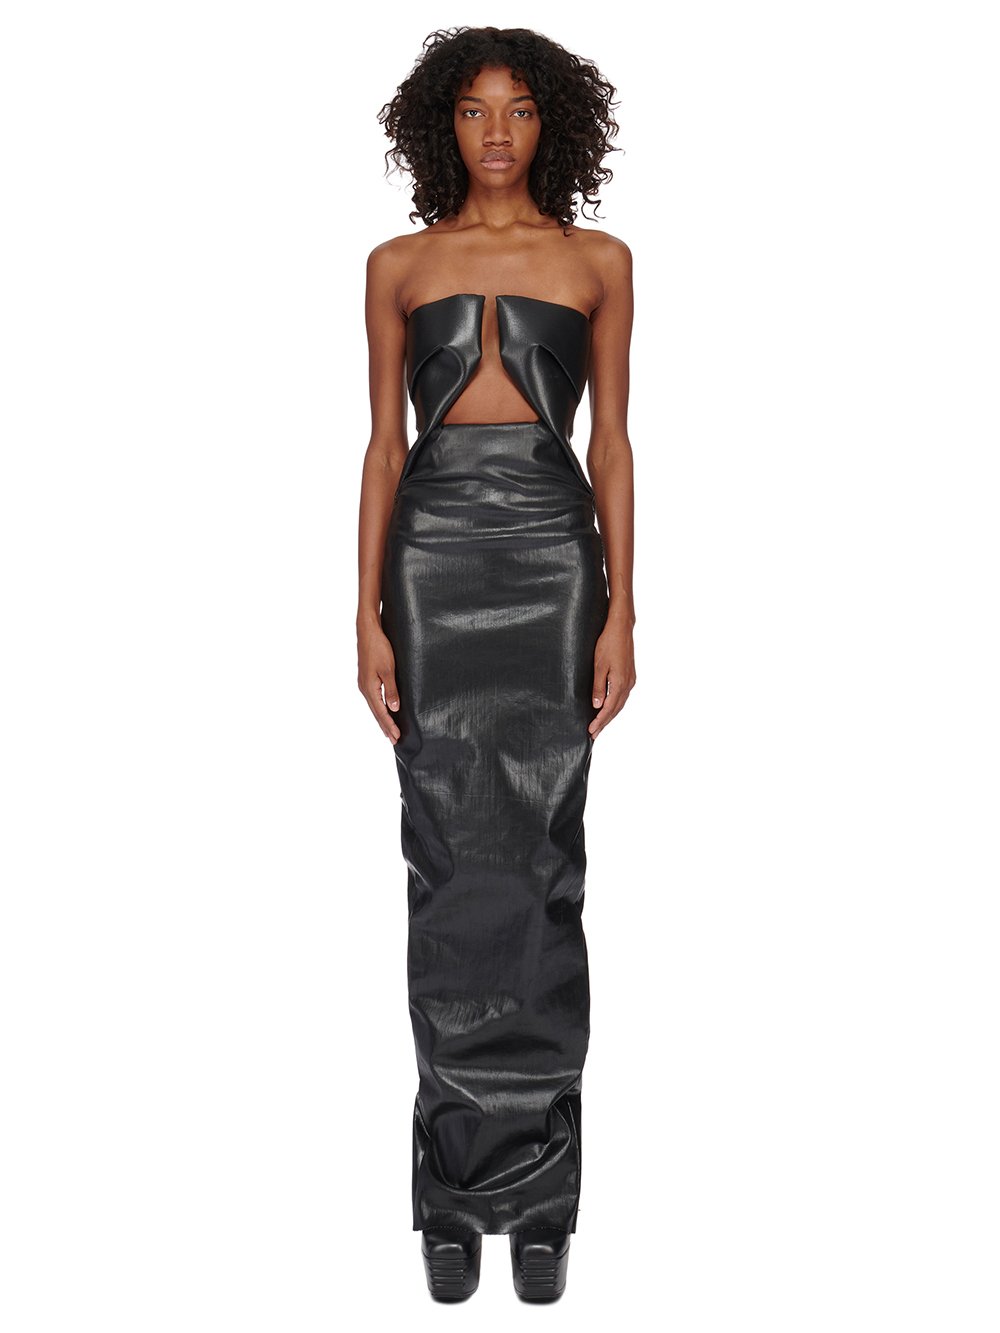 RICK OWENS FW23 LUXOR PRONG GOWN IN BLACK CRACKED STRETCH DENIM